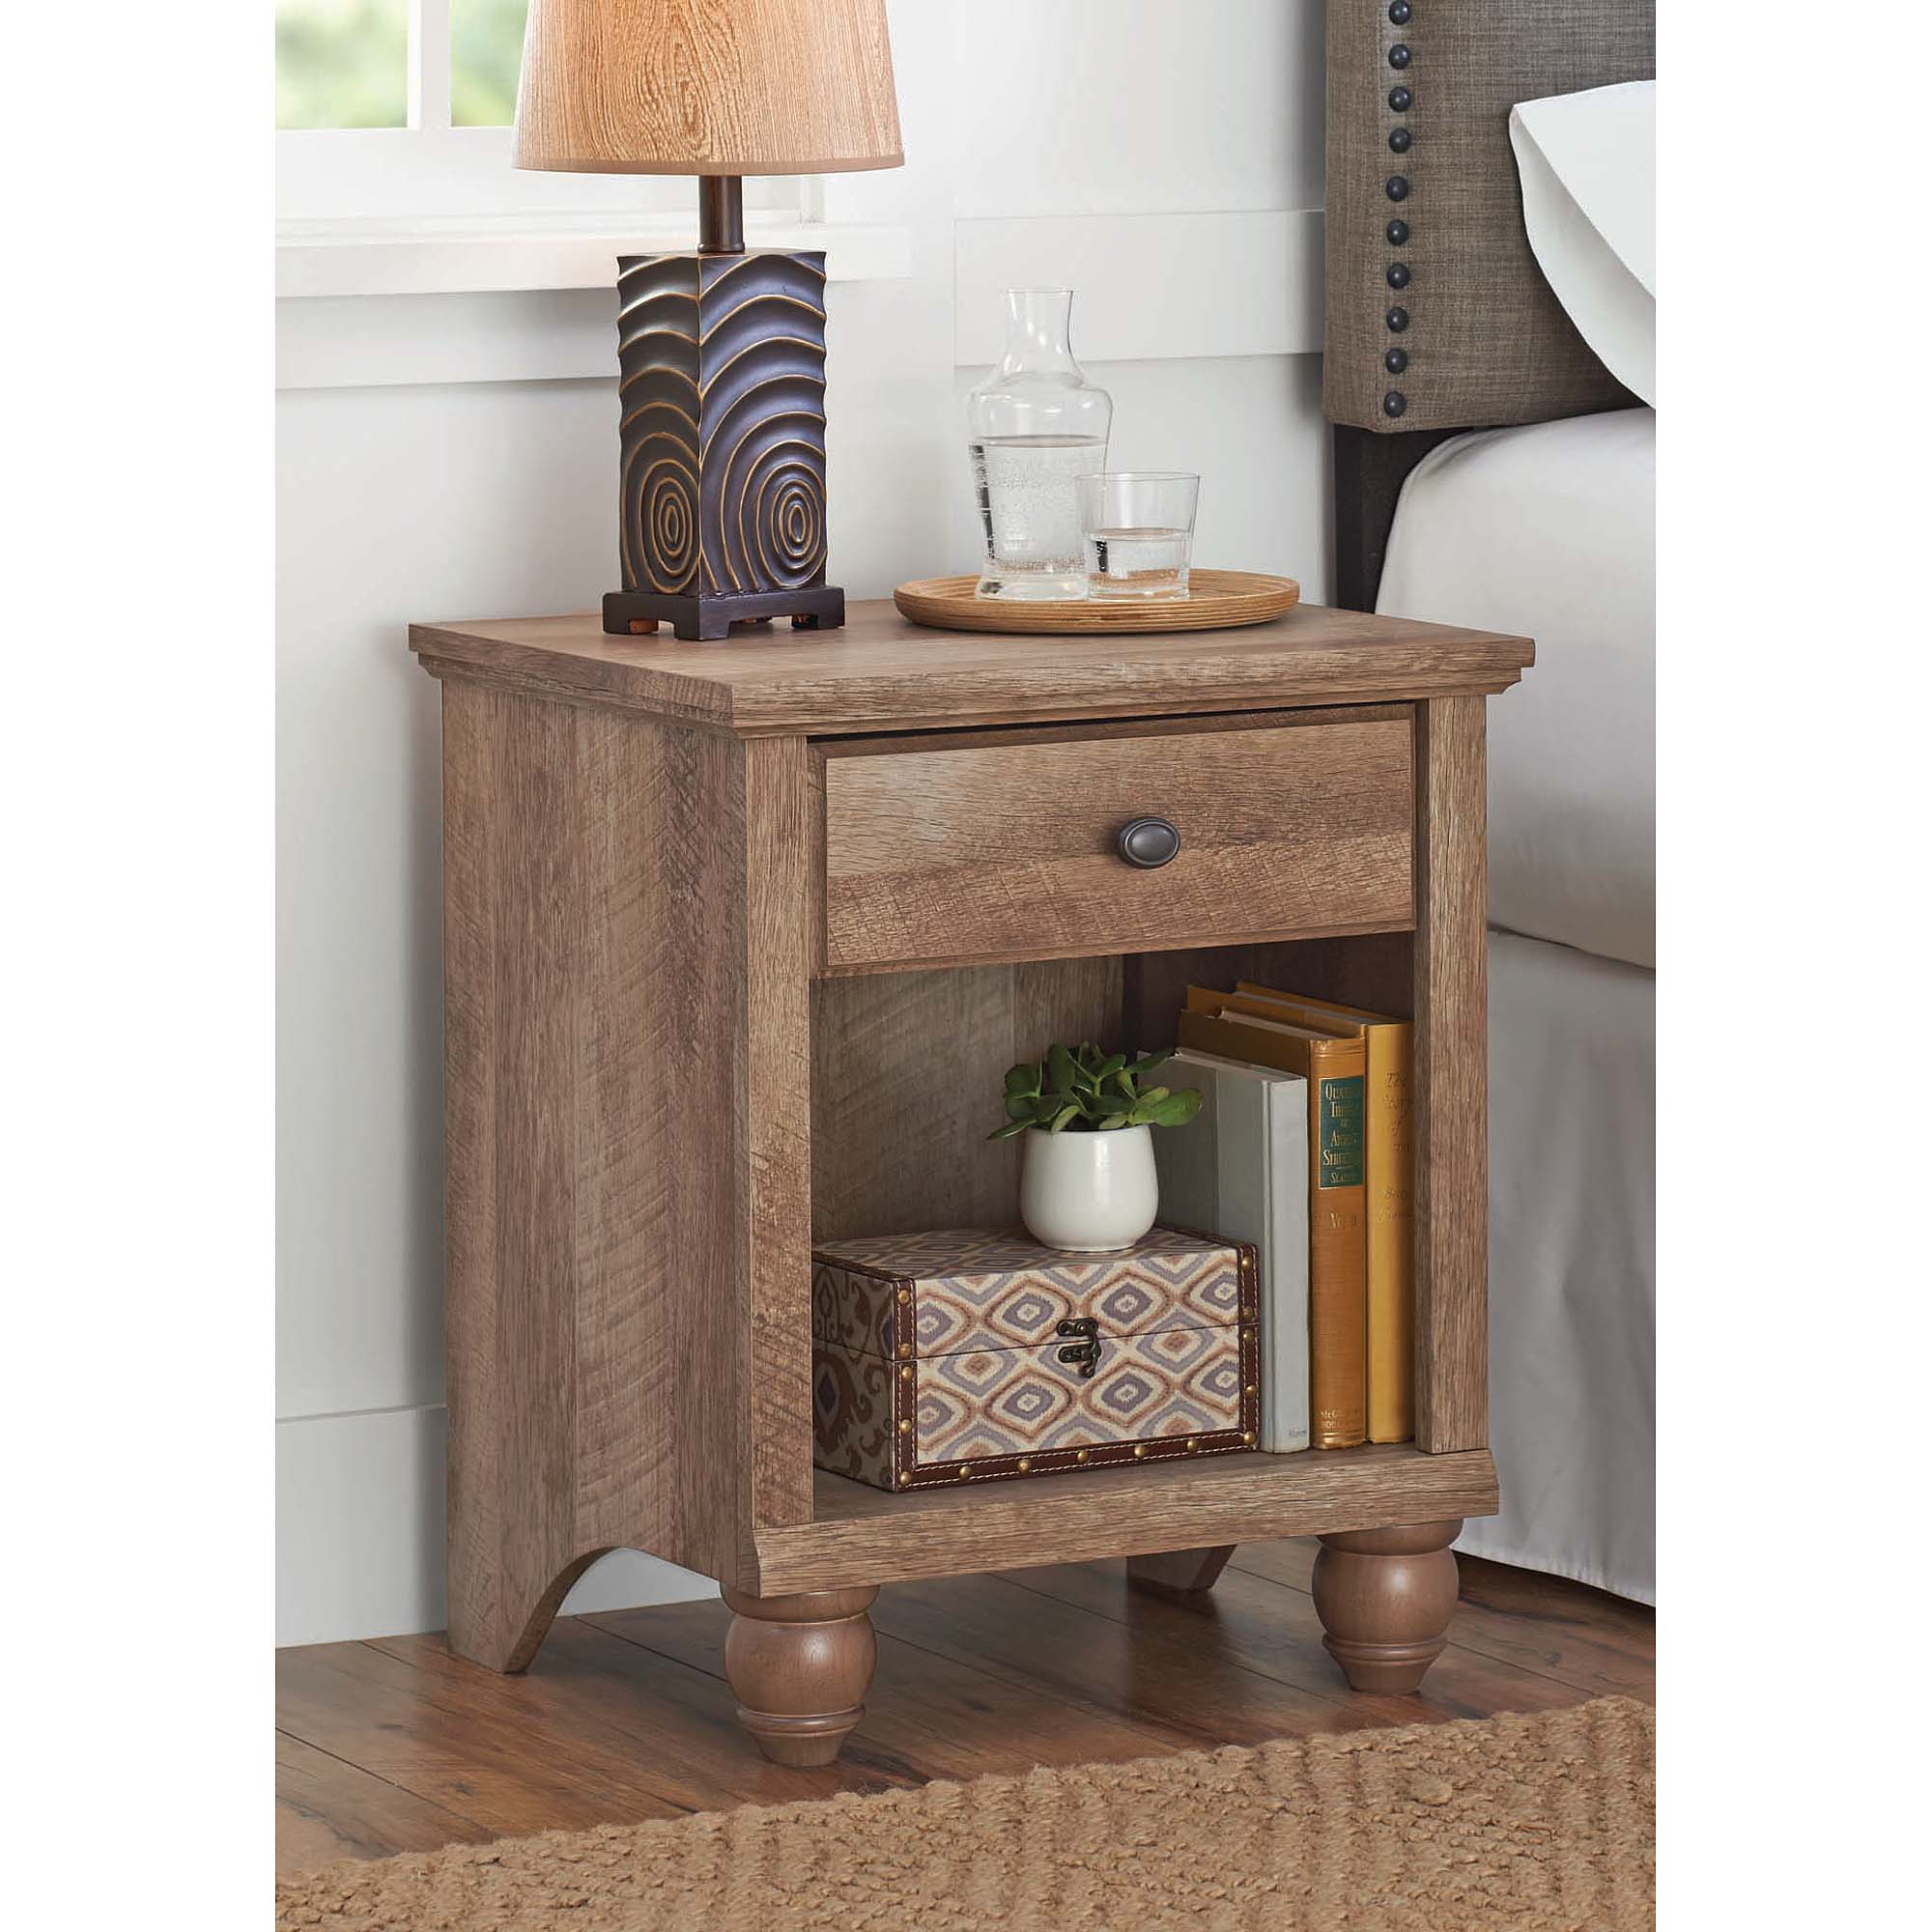 Better Homes & Gardens Crossmill Accent Table, Weathered Finish - image 1 of 8